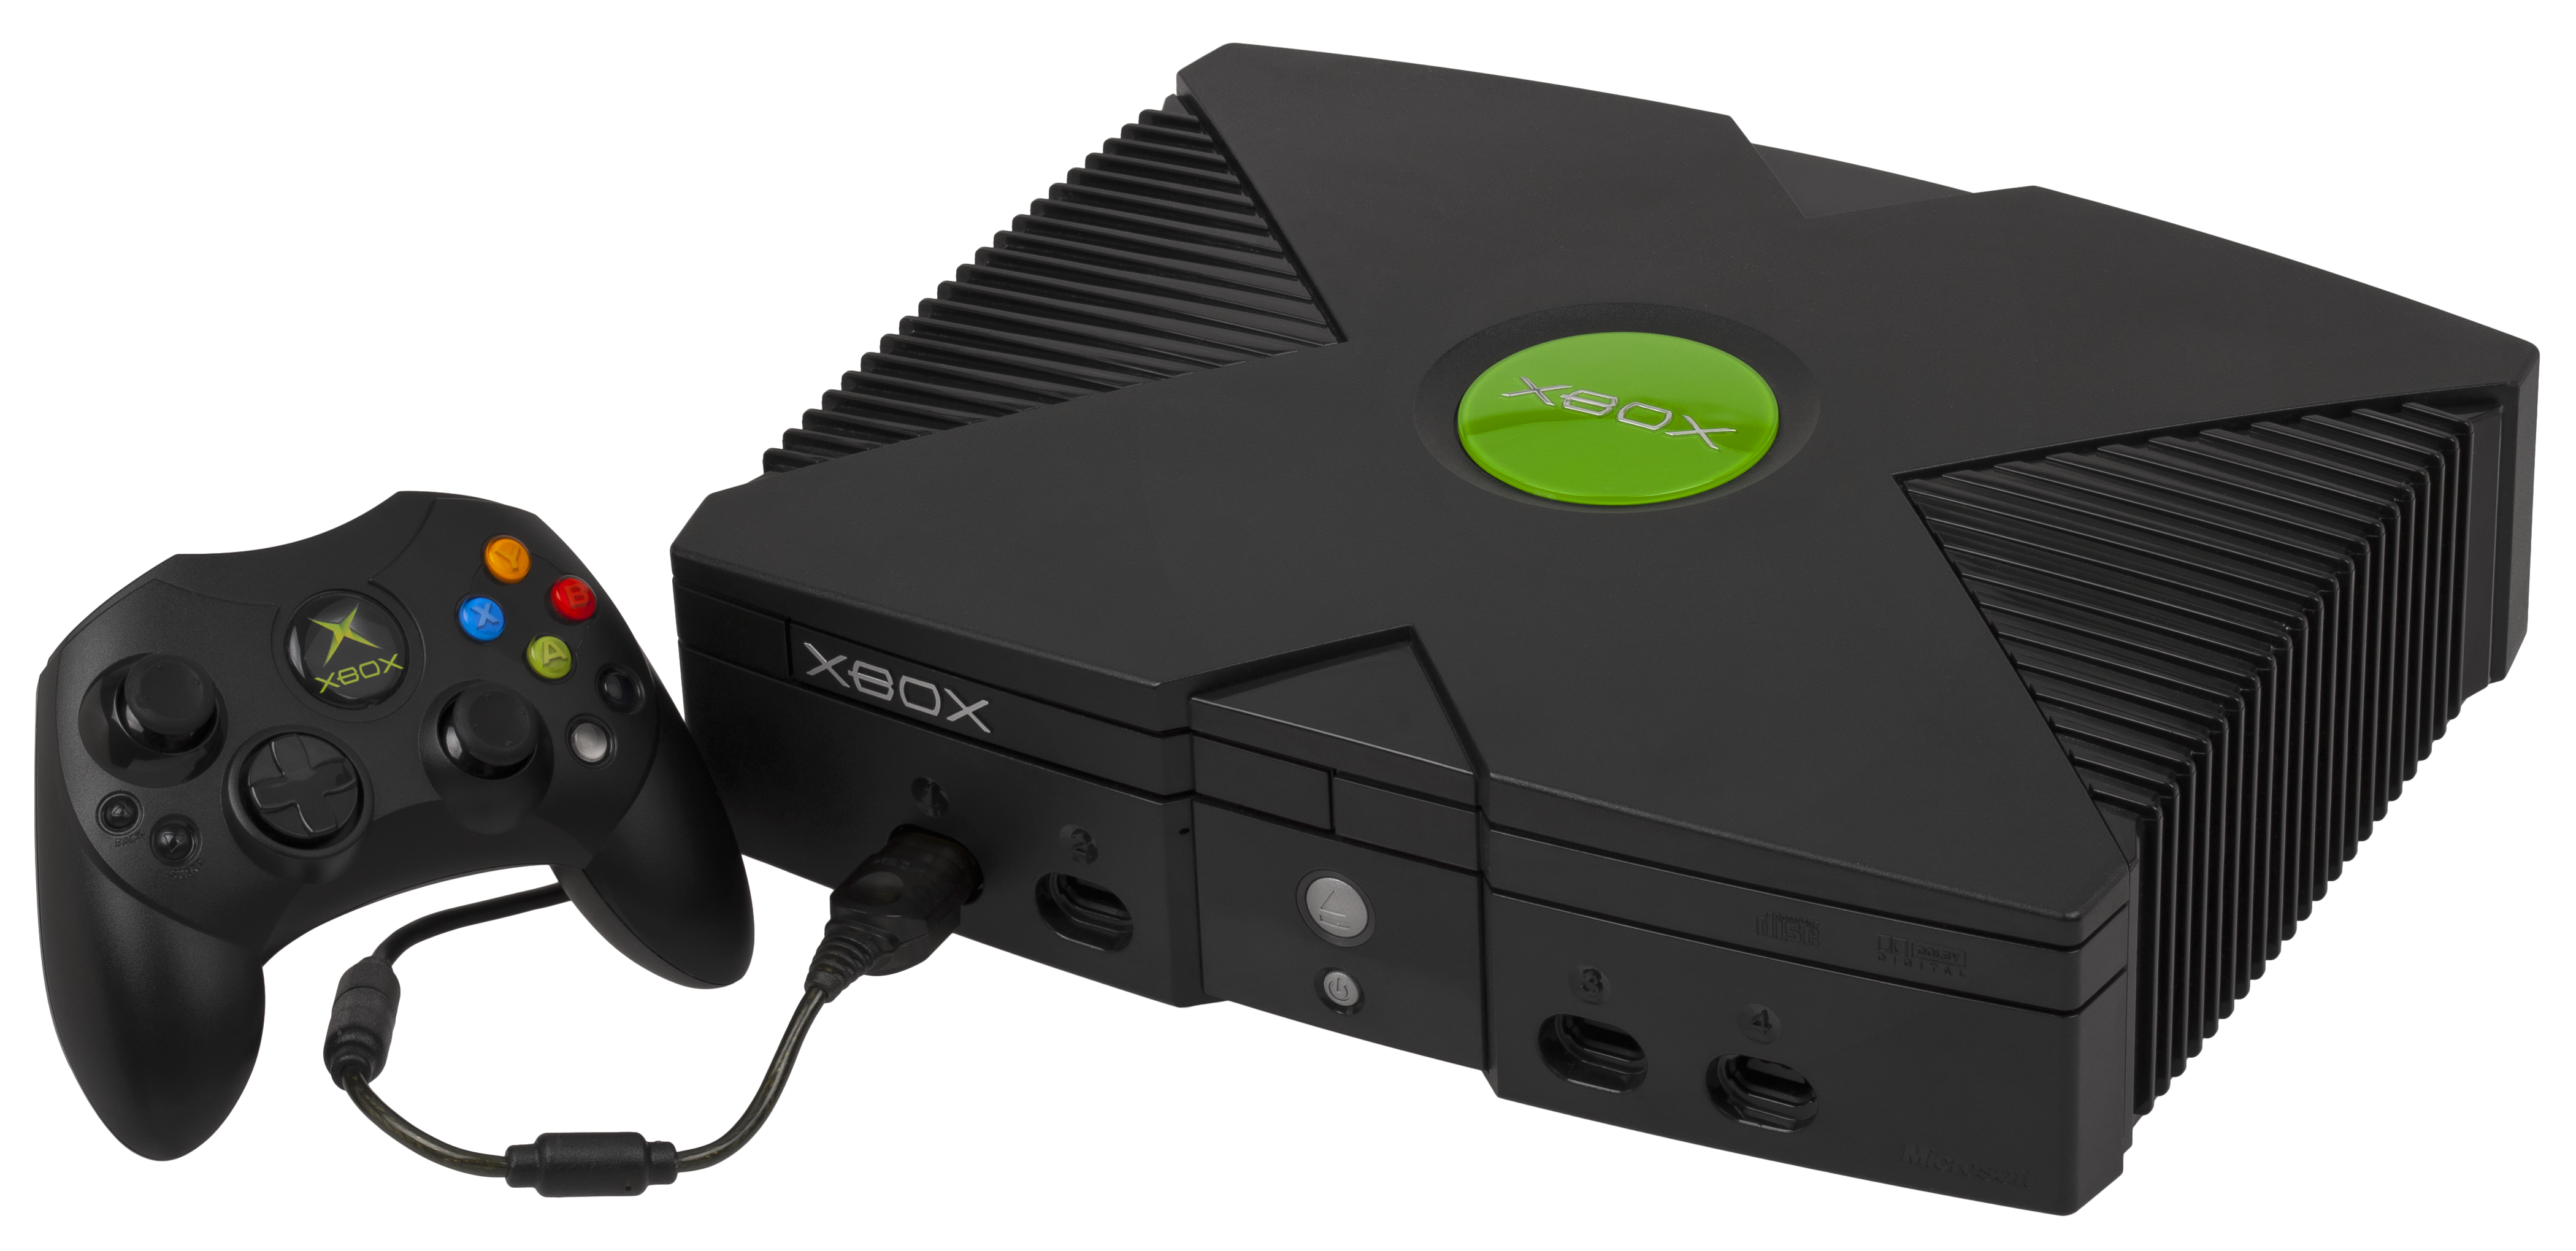 PNG File Name: Xbox PlusPng.c